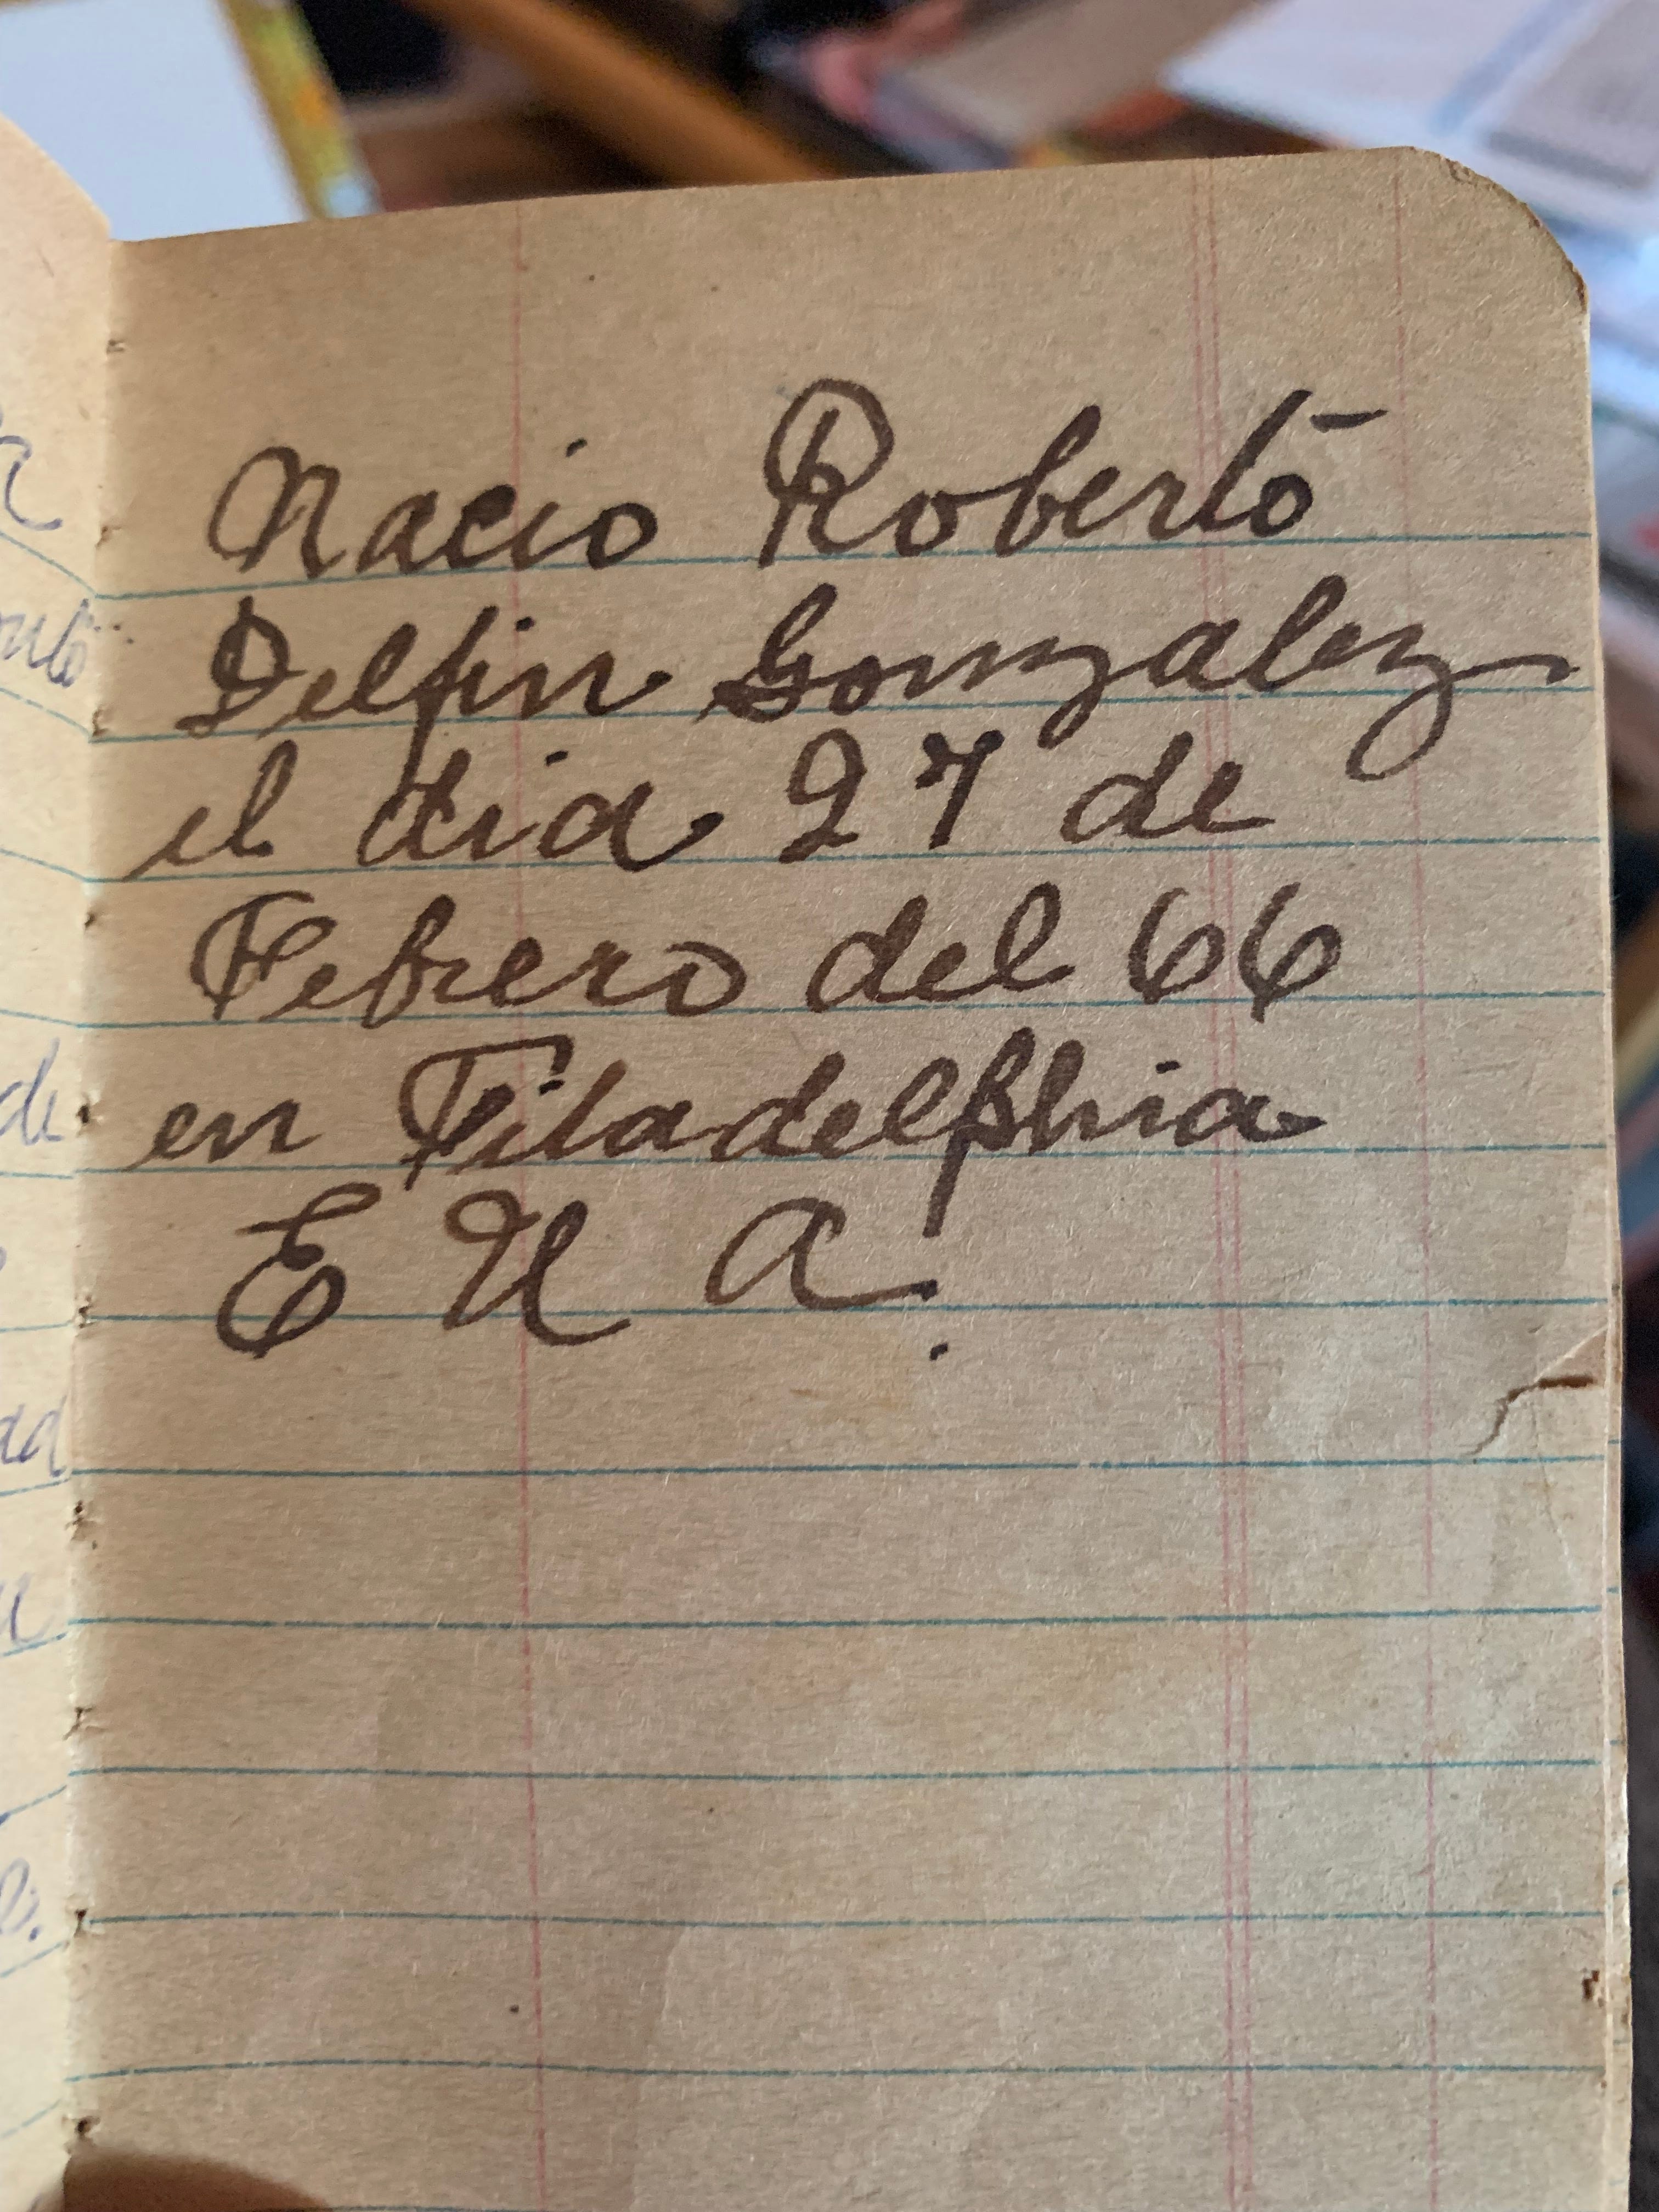 While communication was difficult between those in Cuba and in the United States, news would trickle back to the island. Here, my great grandfather notes the birth on my youngest uncle back in Philadelphia on Feb. 27, 1966.